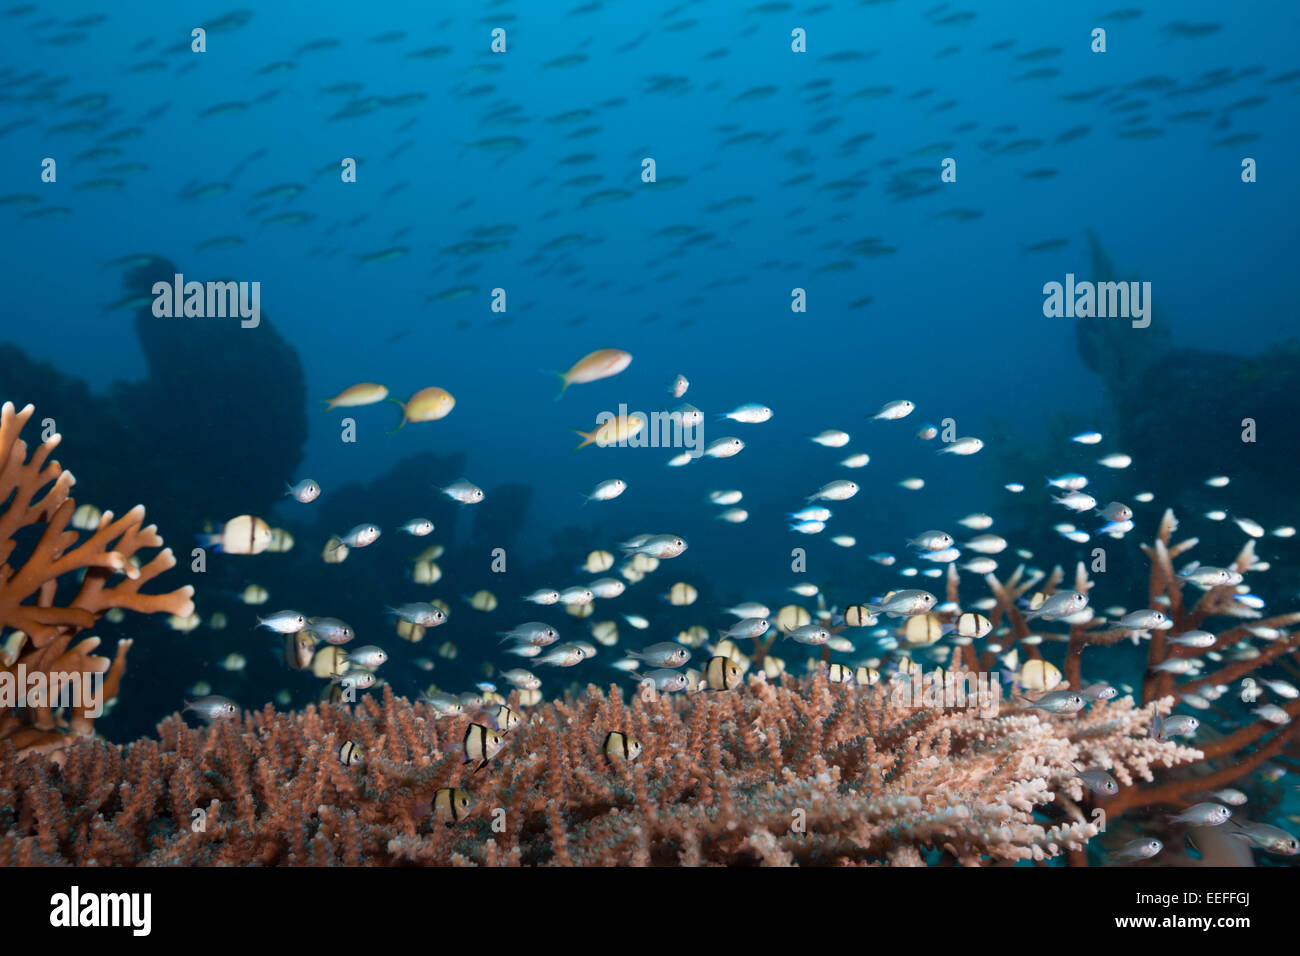 Various Coralfishes over Branching Corals, Tanimbar Islands, Moluccas, Indonesia Stock Photo